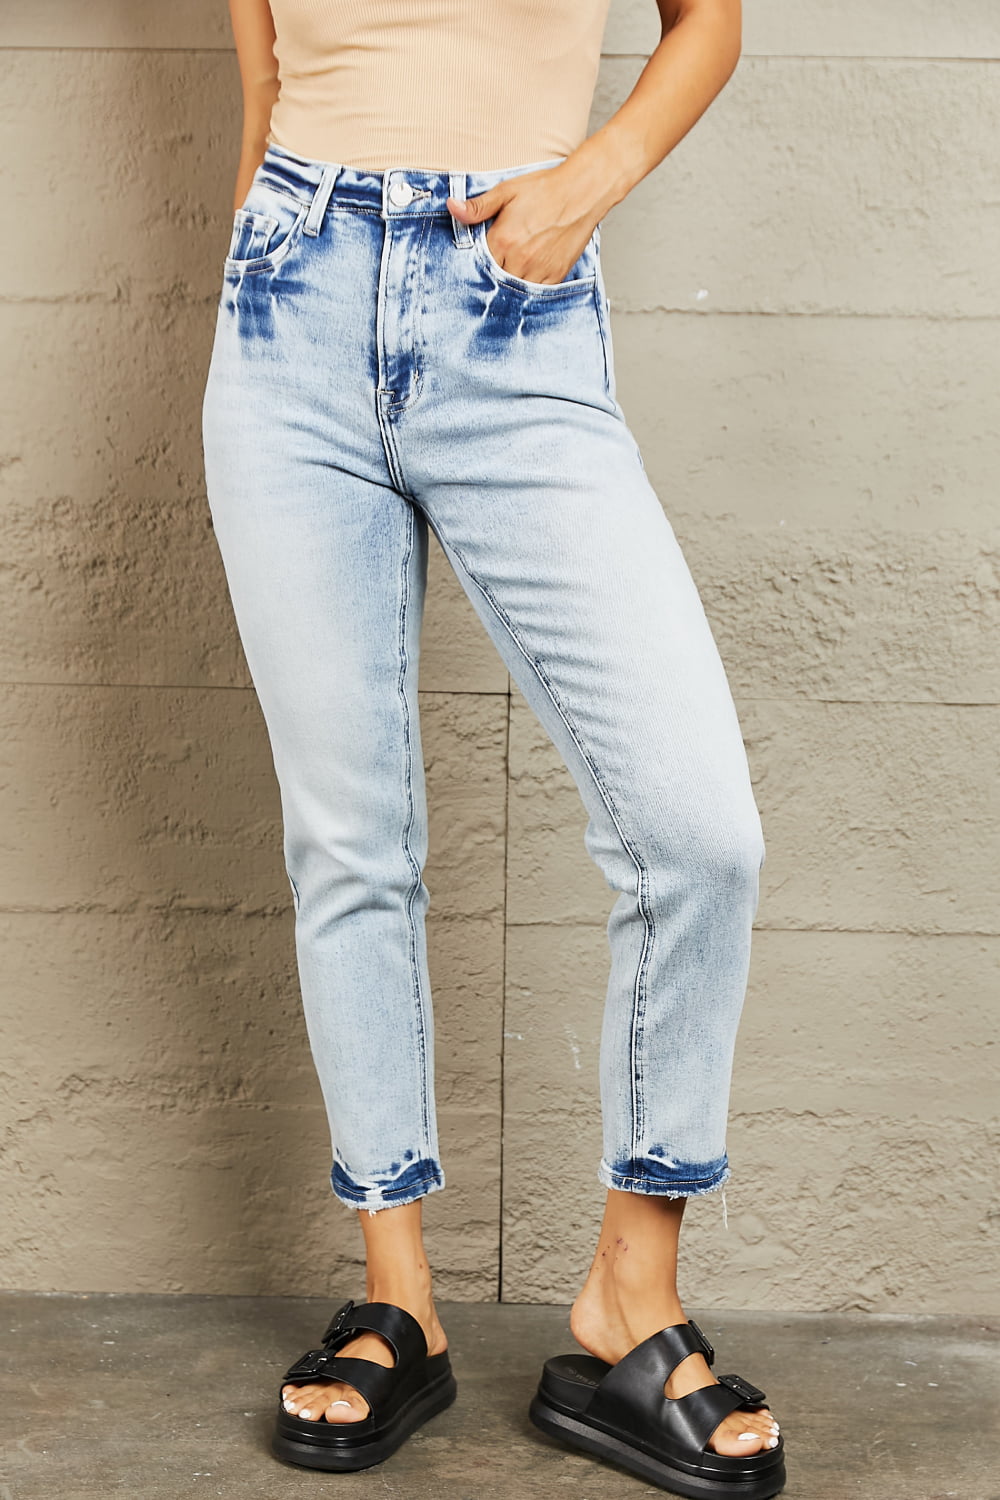 BAYEAS Lella High Waisted Acid Washed Relaxed Blue Denim Skinny Jeans